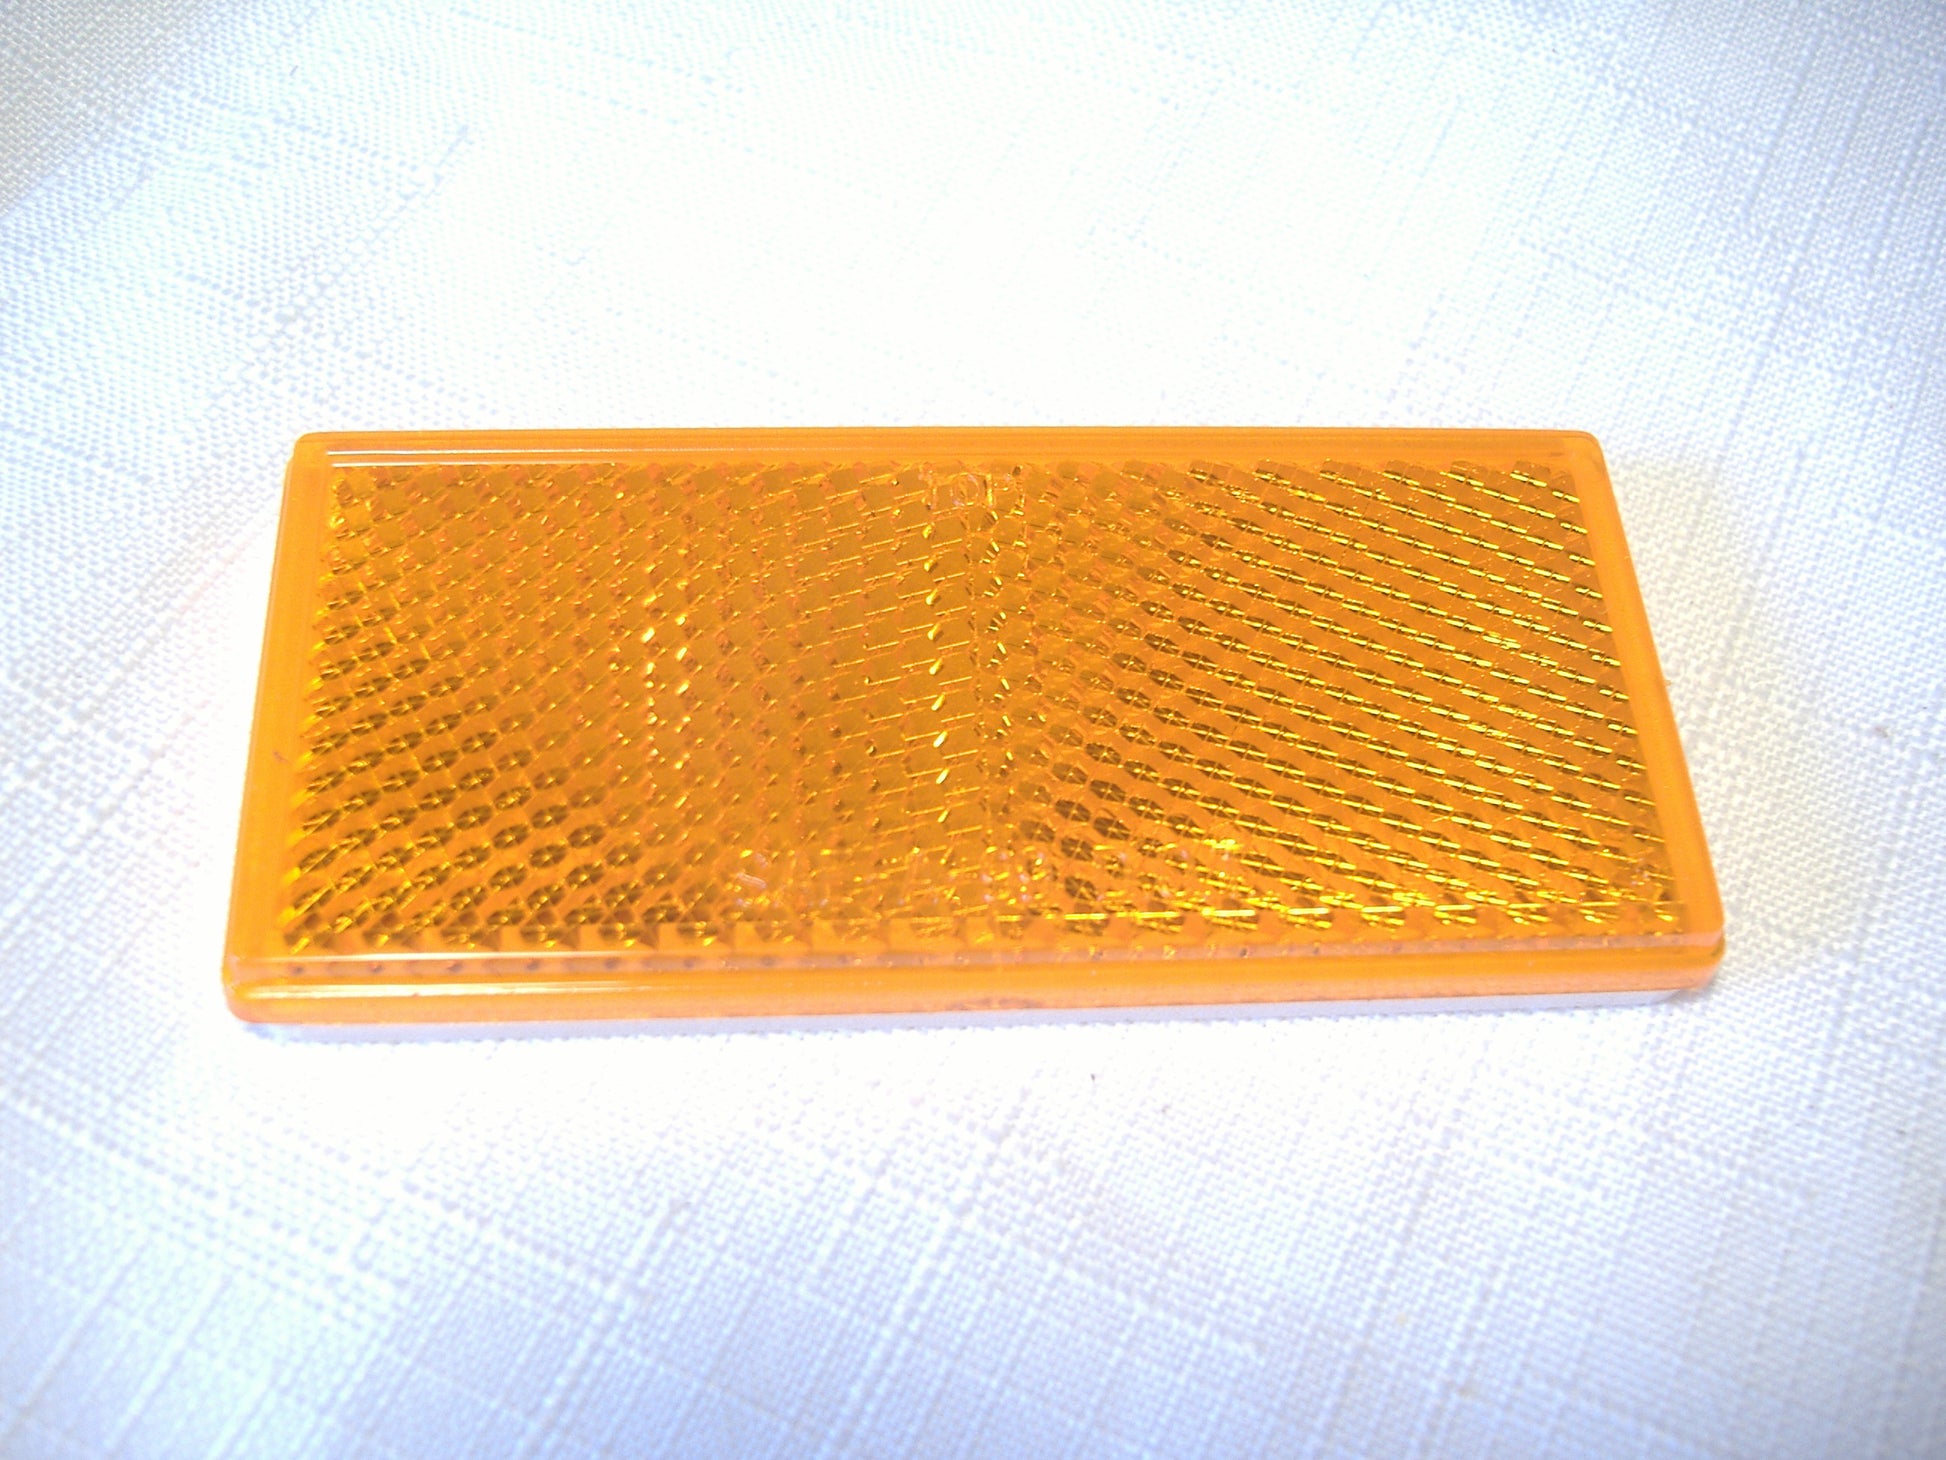 motorcycle sidecar amber reflector for fender or body